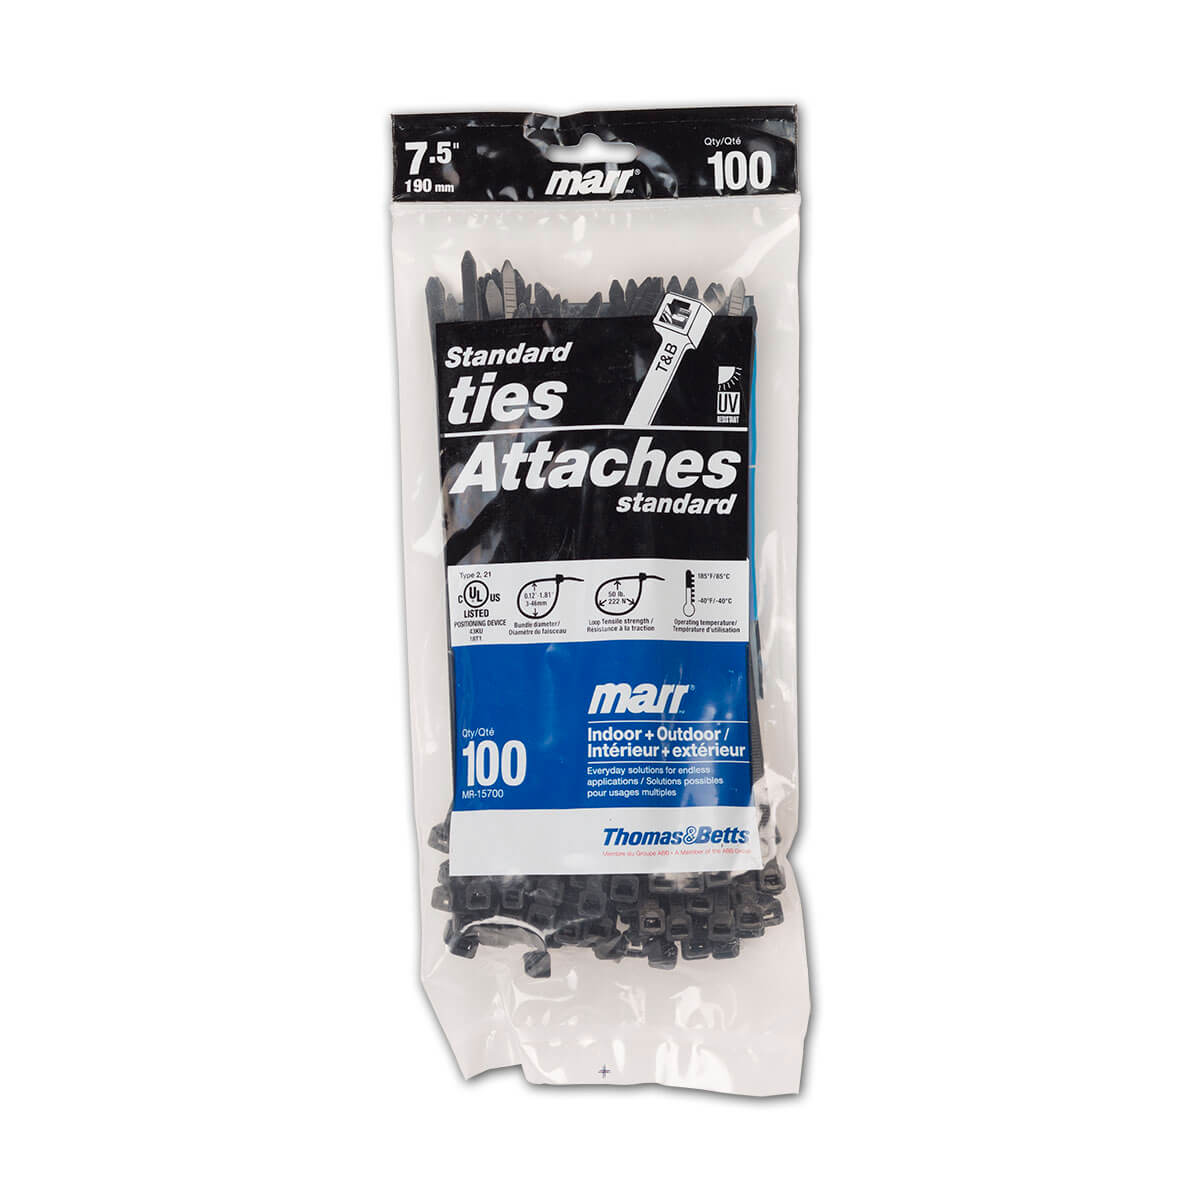 UV Black Twist Tail Cable Ties 7.5-in - Bag of 100